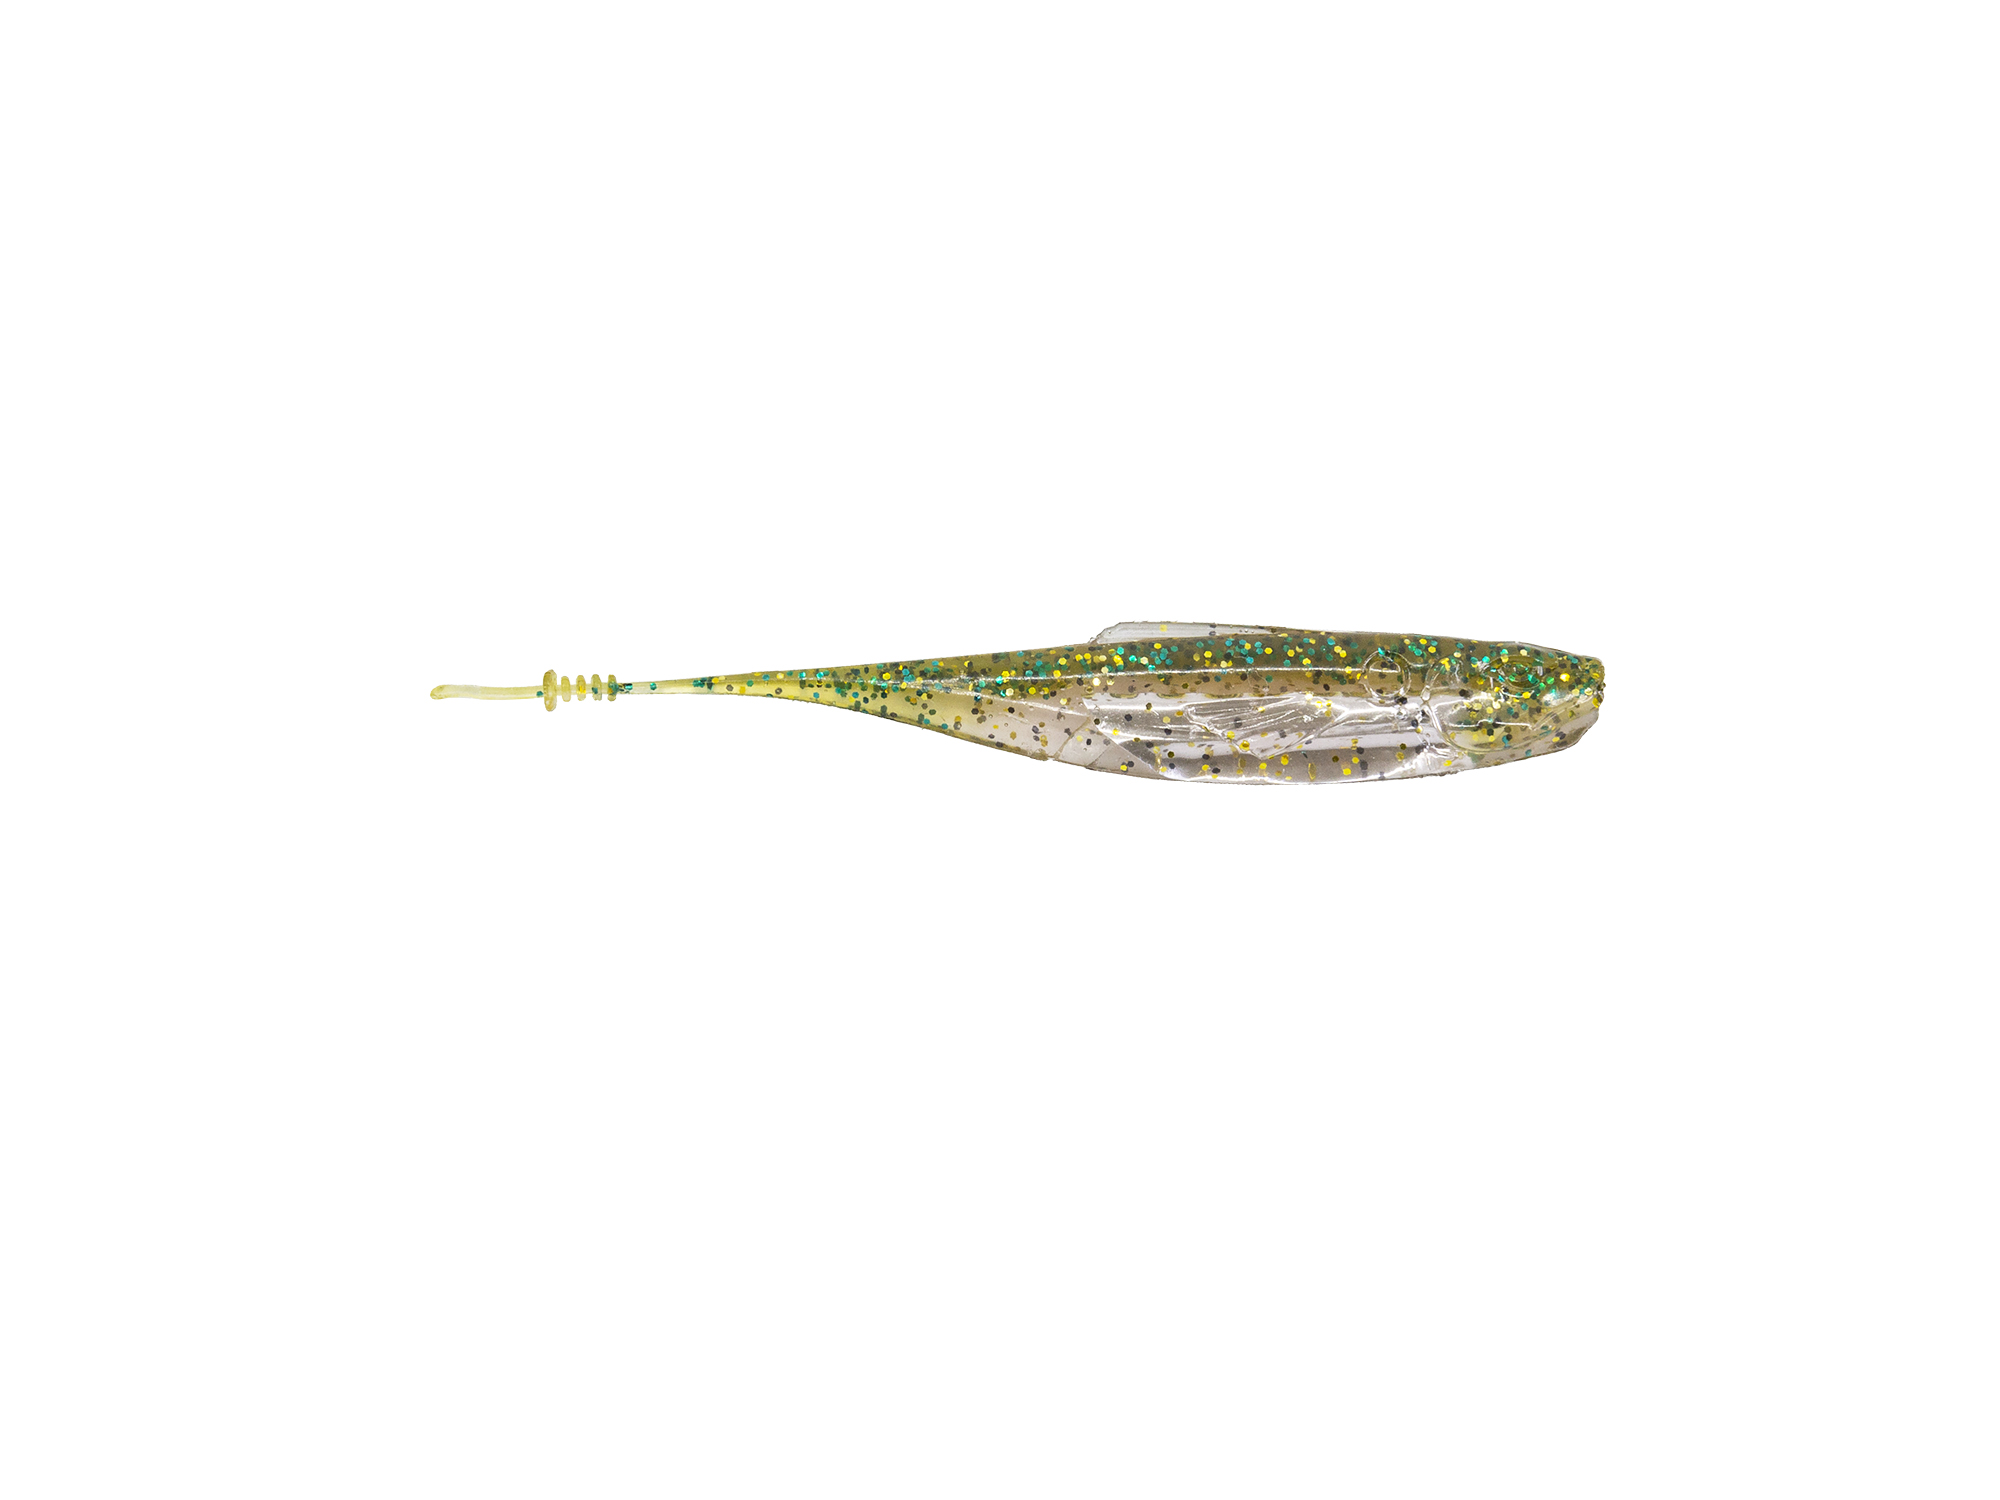 Minnow Crappie Tube Baby Bass / 20 Pack